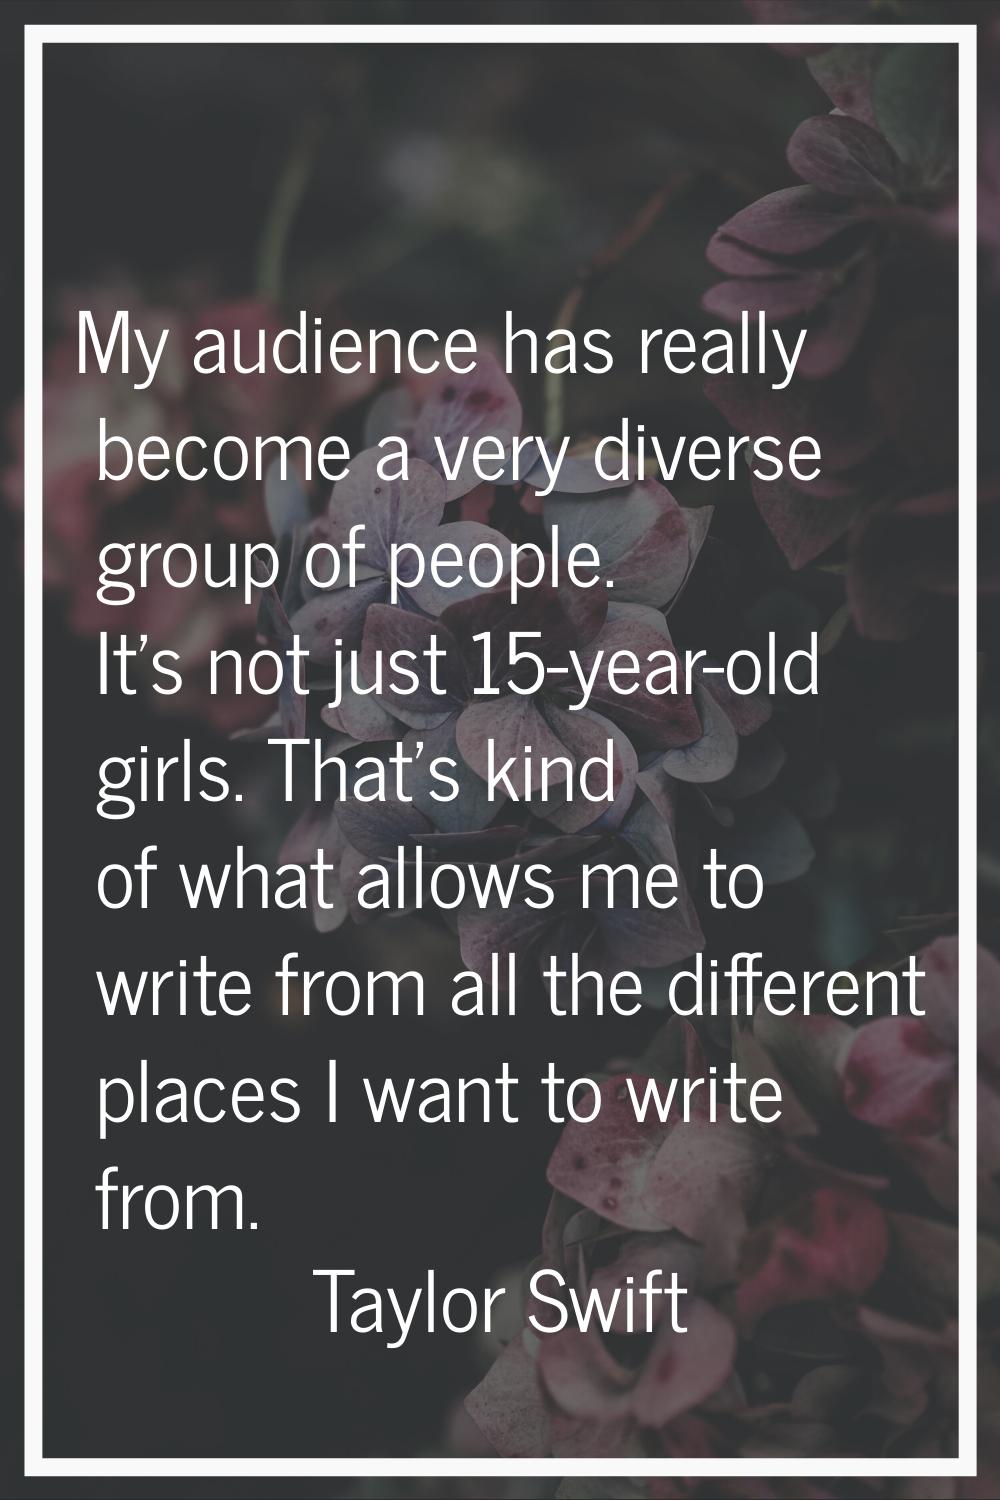 My audience has really become a very diverse group of people. It's not just 15-year-old girls. That